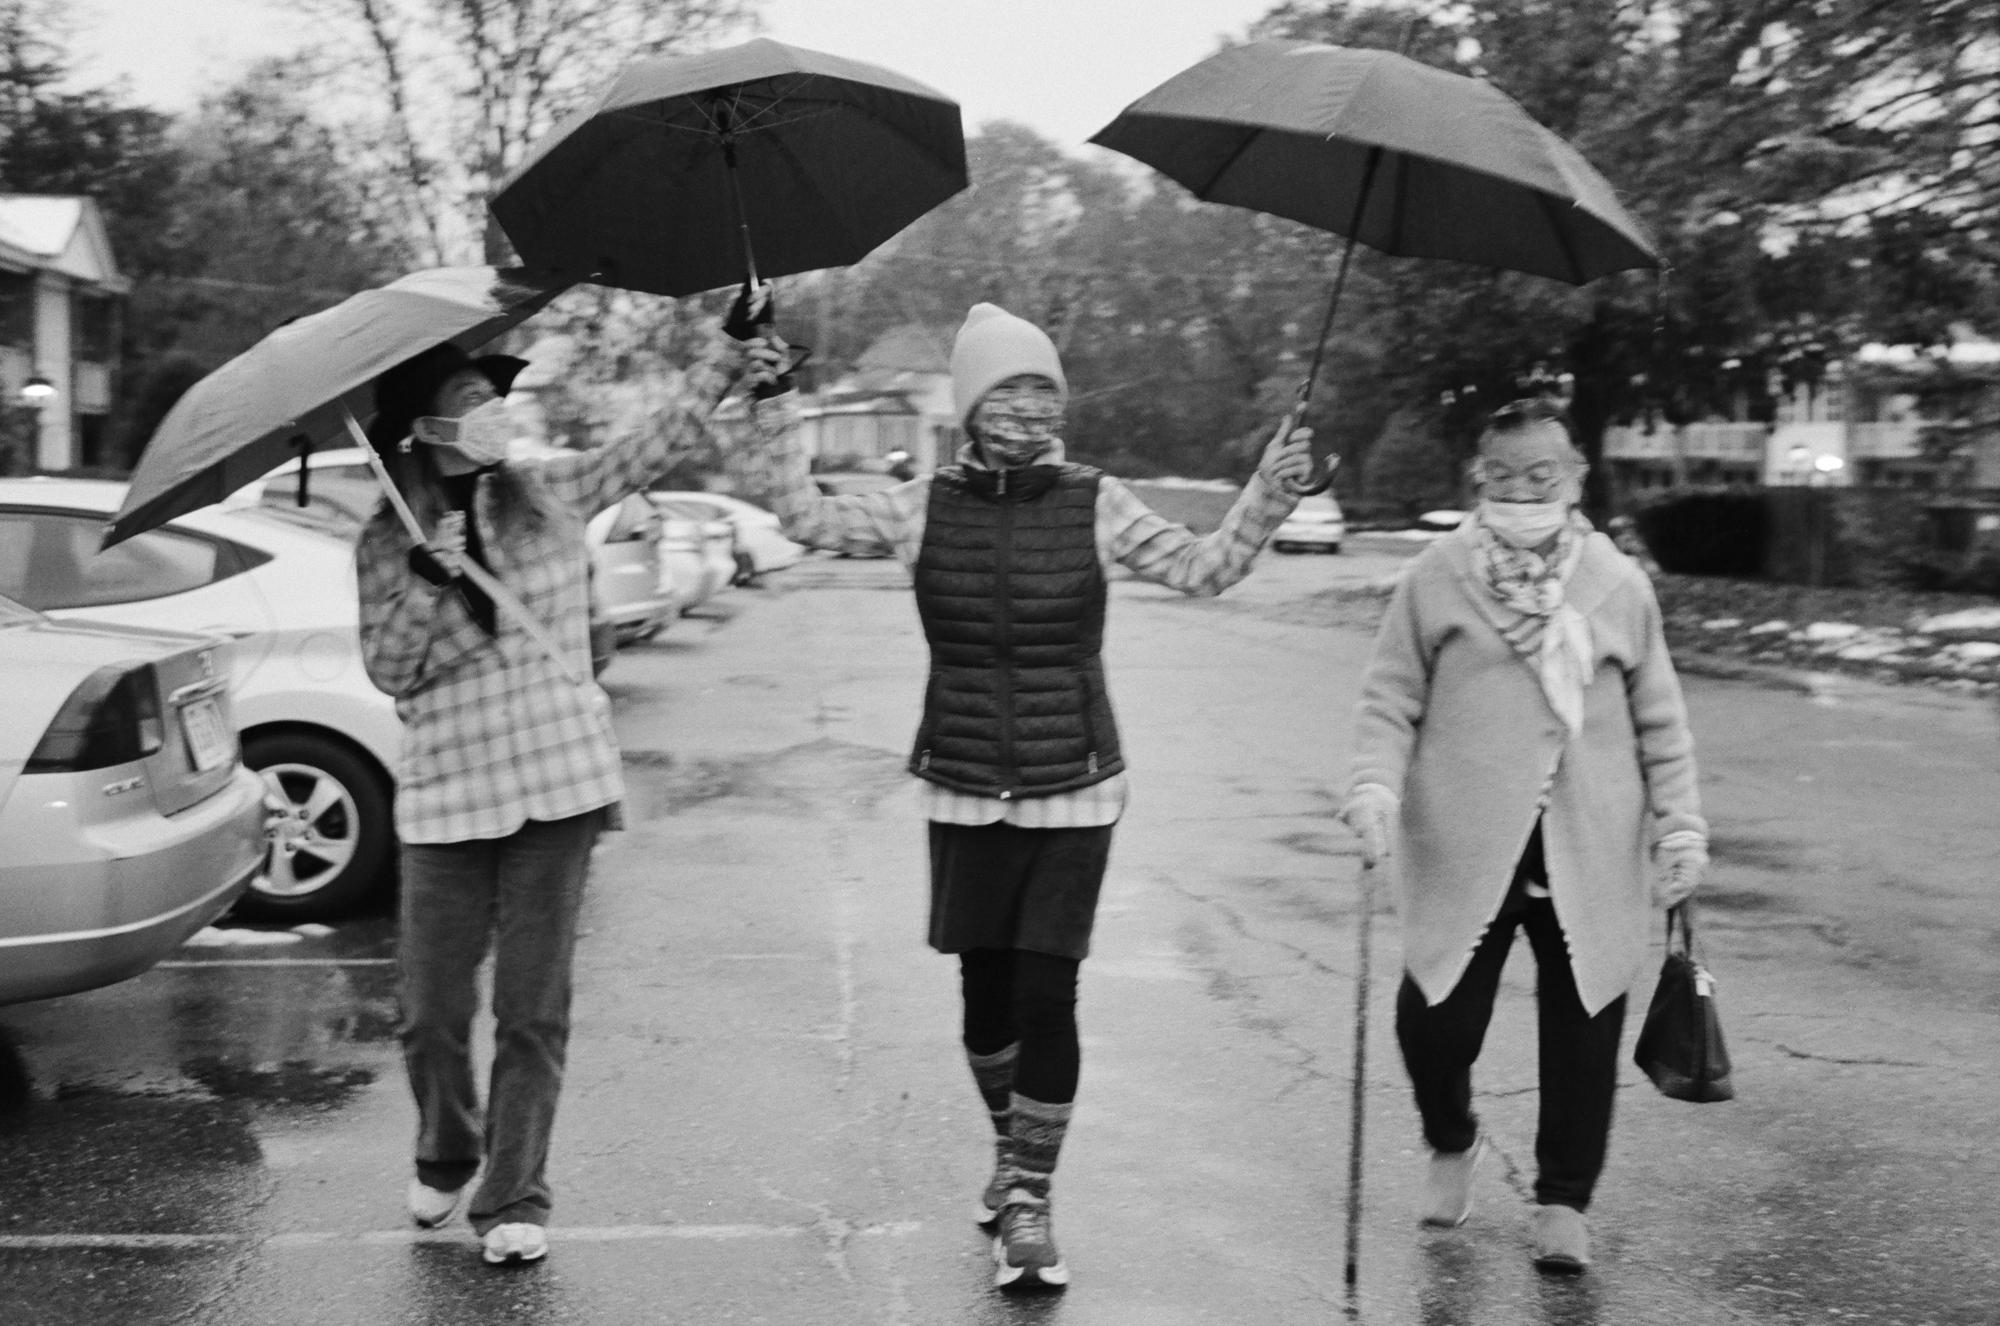 Katherine In Covid - Katherine walking with her mom and halmoni in the rain...